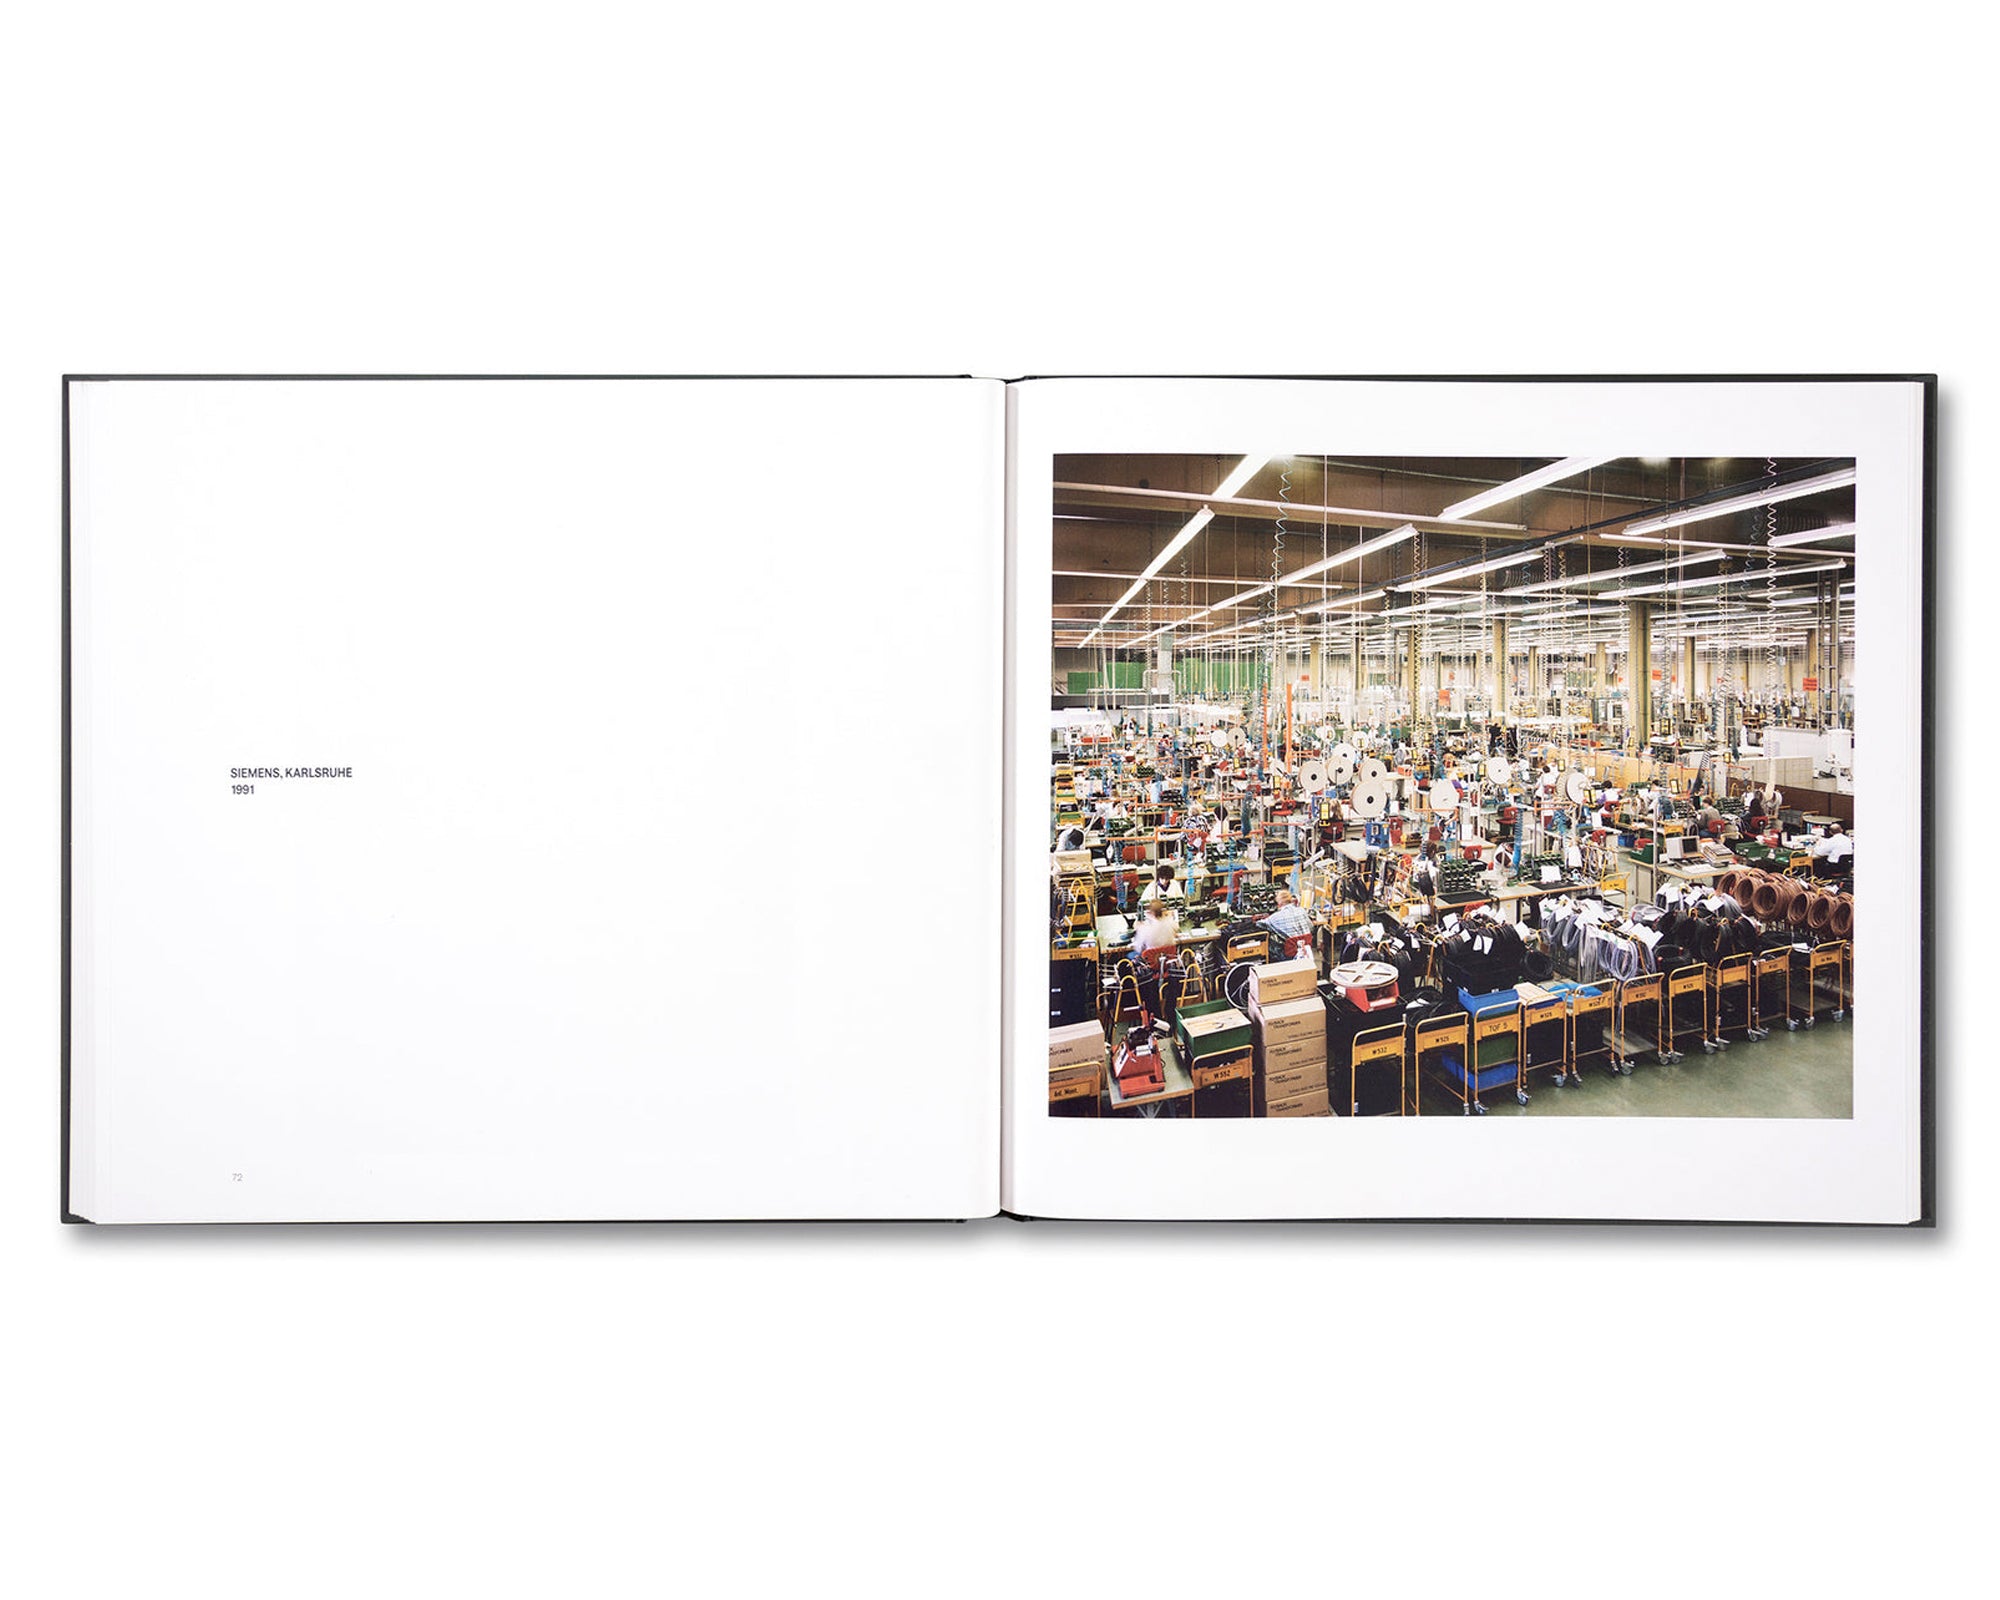 VISUAL SPACES OF TODAY by Andreas Gursky